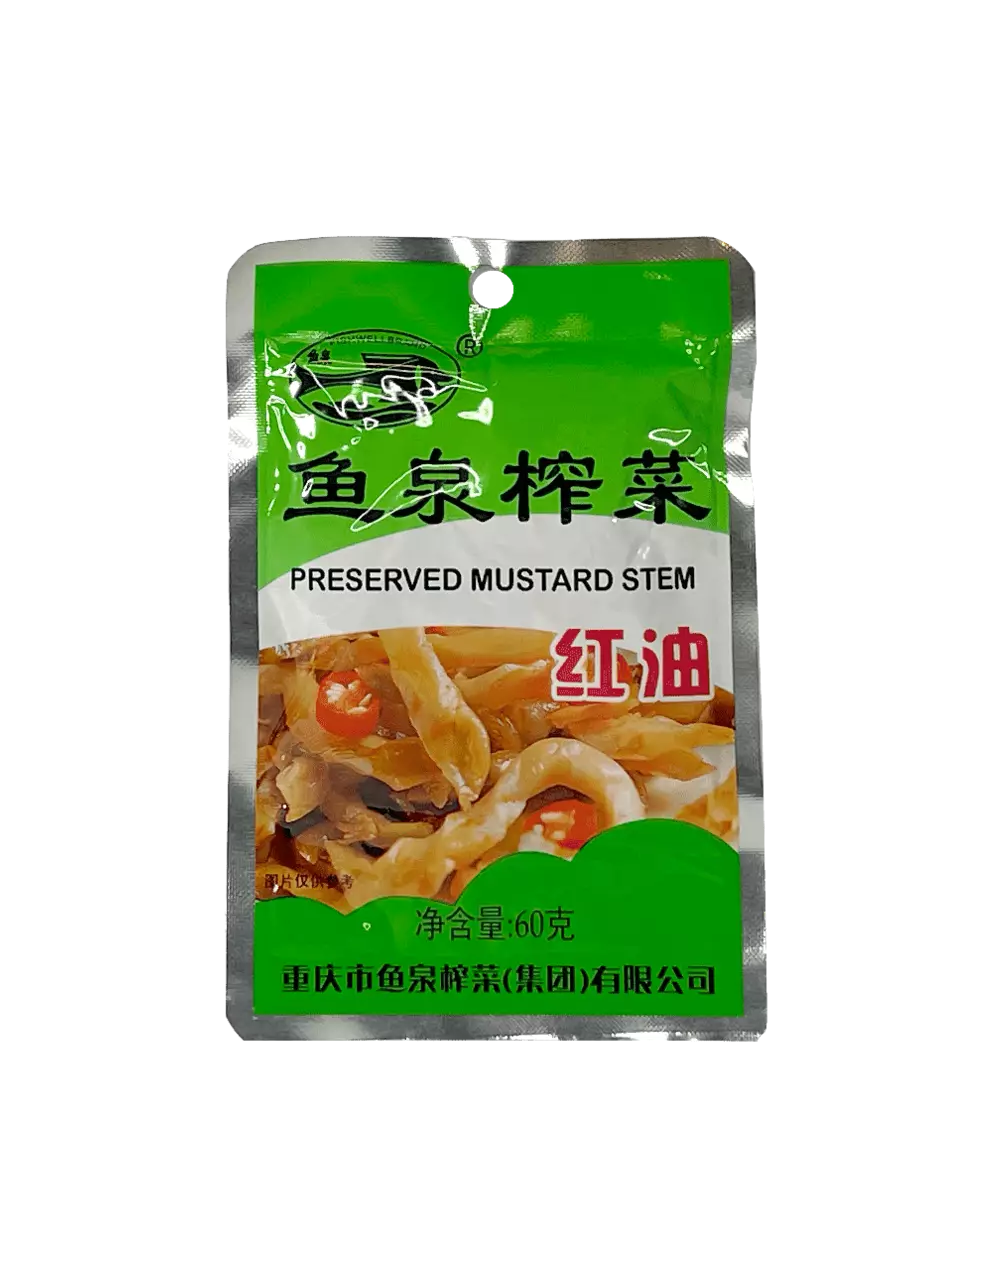 Preserved Mustard Stem in Chili Oil 60g Fish Well China